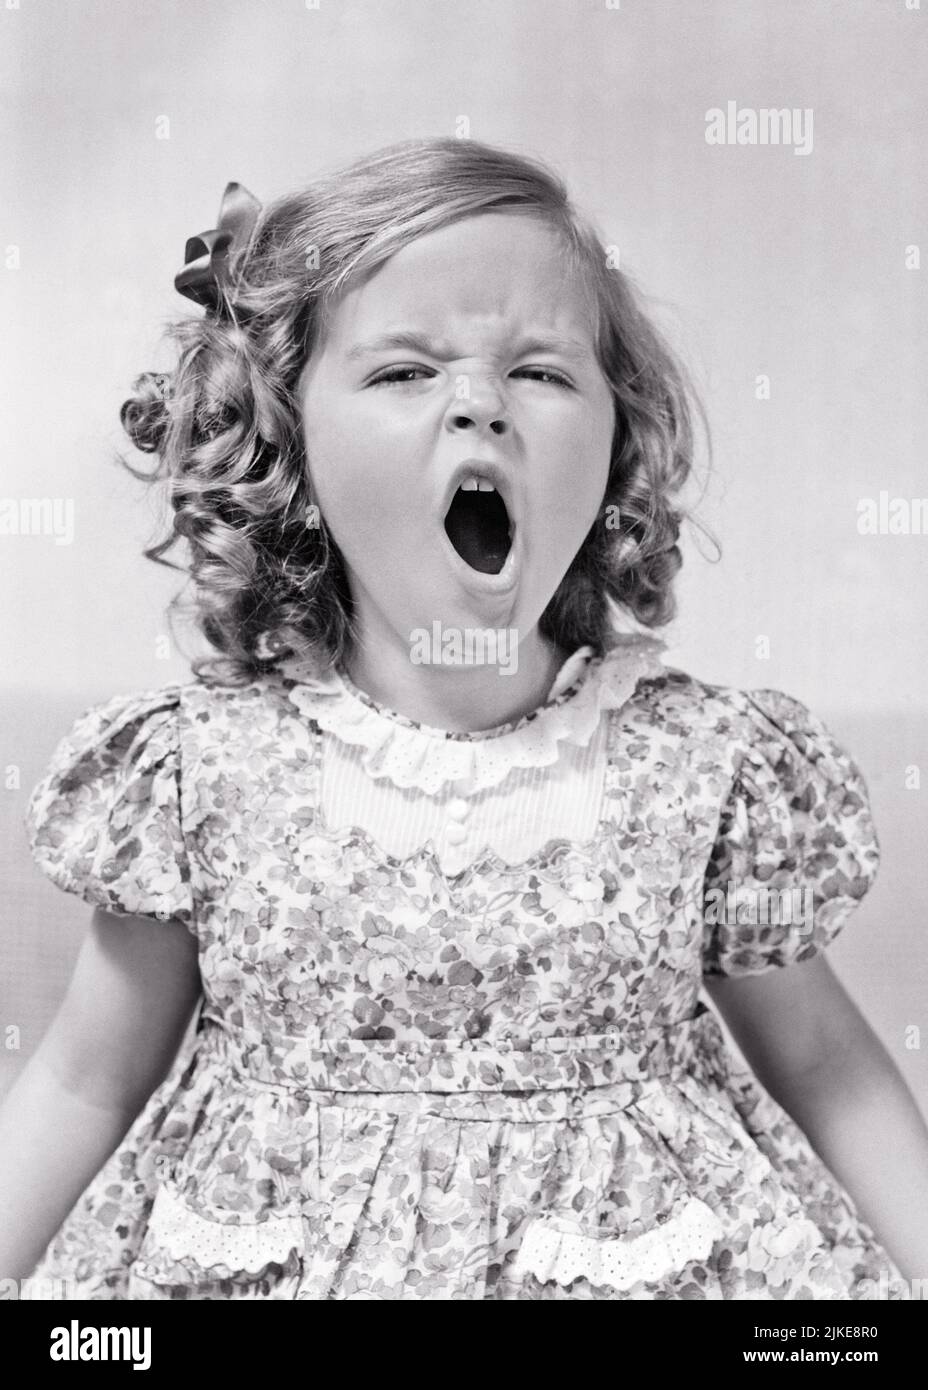 1940s LITTLE GIRL MOUTH OPEN WIDE FACE SCRUNCHED UP SHOUTING YELLING YAWNING SINGING TANTRUM ANGRY - j9800 HAR001 HARS JUVENILE FACIAL STYLE ANGER FEAR TANTRUM WORRY LIFESTYLE FEMALES MOODY COPY SPACE CALLING EXPRESSIONS TROUBLED B&W CONCERNED SADNESS WIDE YELLING EYE CONTACT BRAT EXCITEMENT LOUD POWERFUL CURLY FRILLY UP FEELING MOOD CONCEPTUAL GLUM EMOTION EMOTIONAL EMOTIONS JUVENILES MISERABLE SCRUNCHED BLACK AND WHITE CAUCASIAN ETHNICITY DISPLEASED HAR001 OLD FASHIONED Stock Photo